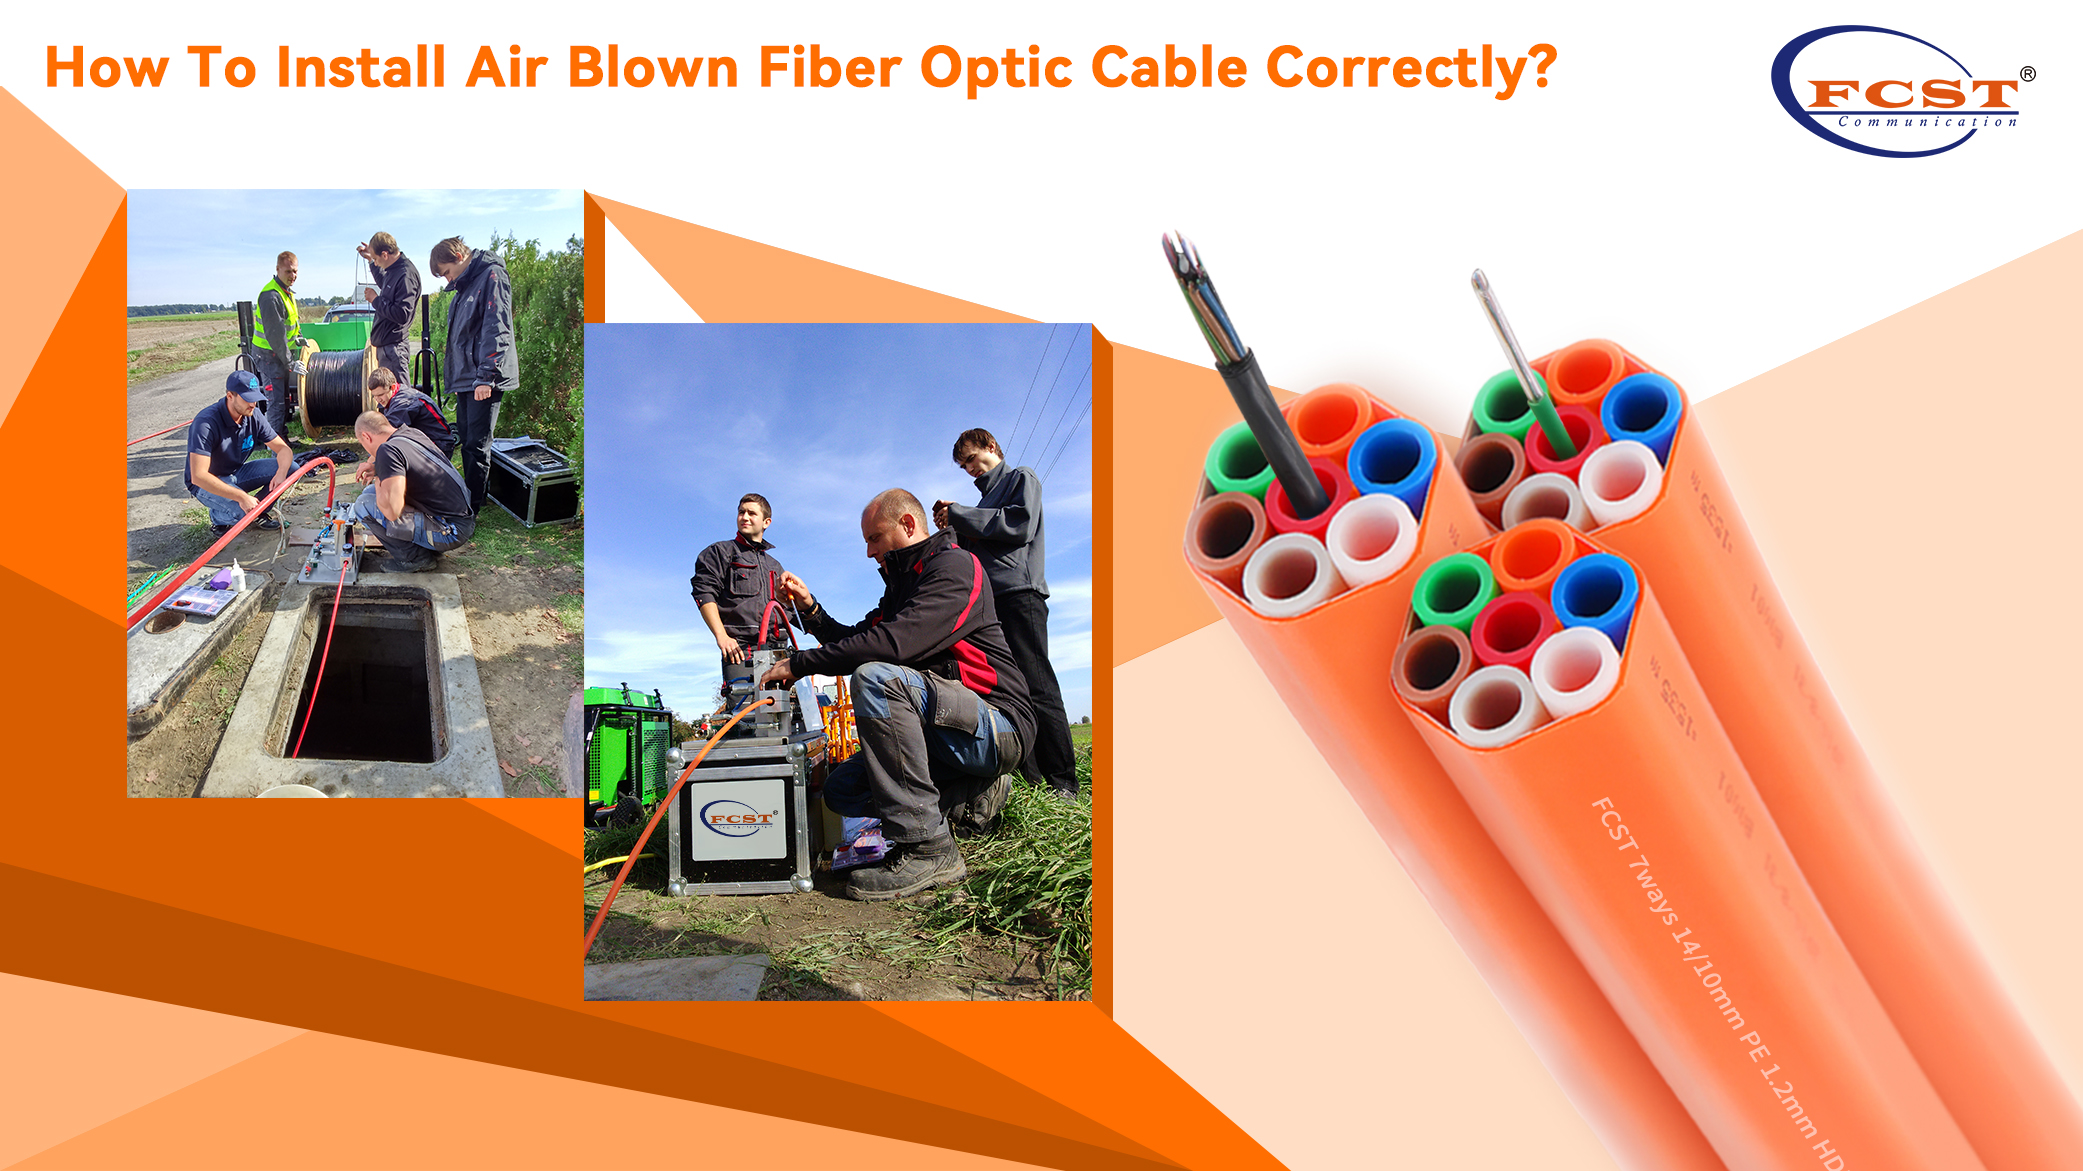 How To Install Air Blown Fiber Optic Cable Correctly?